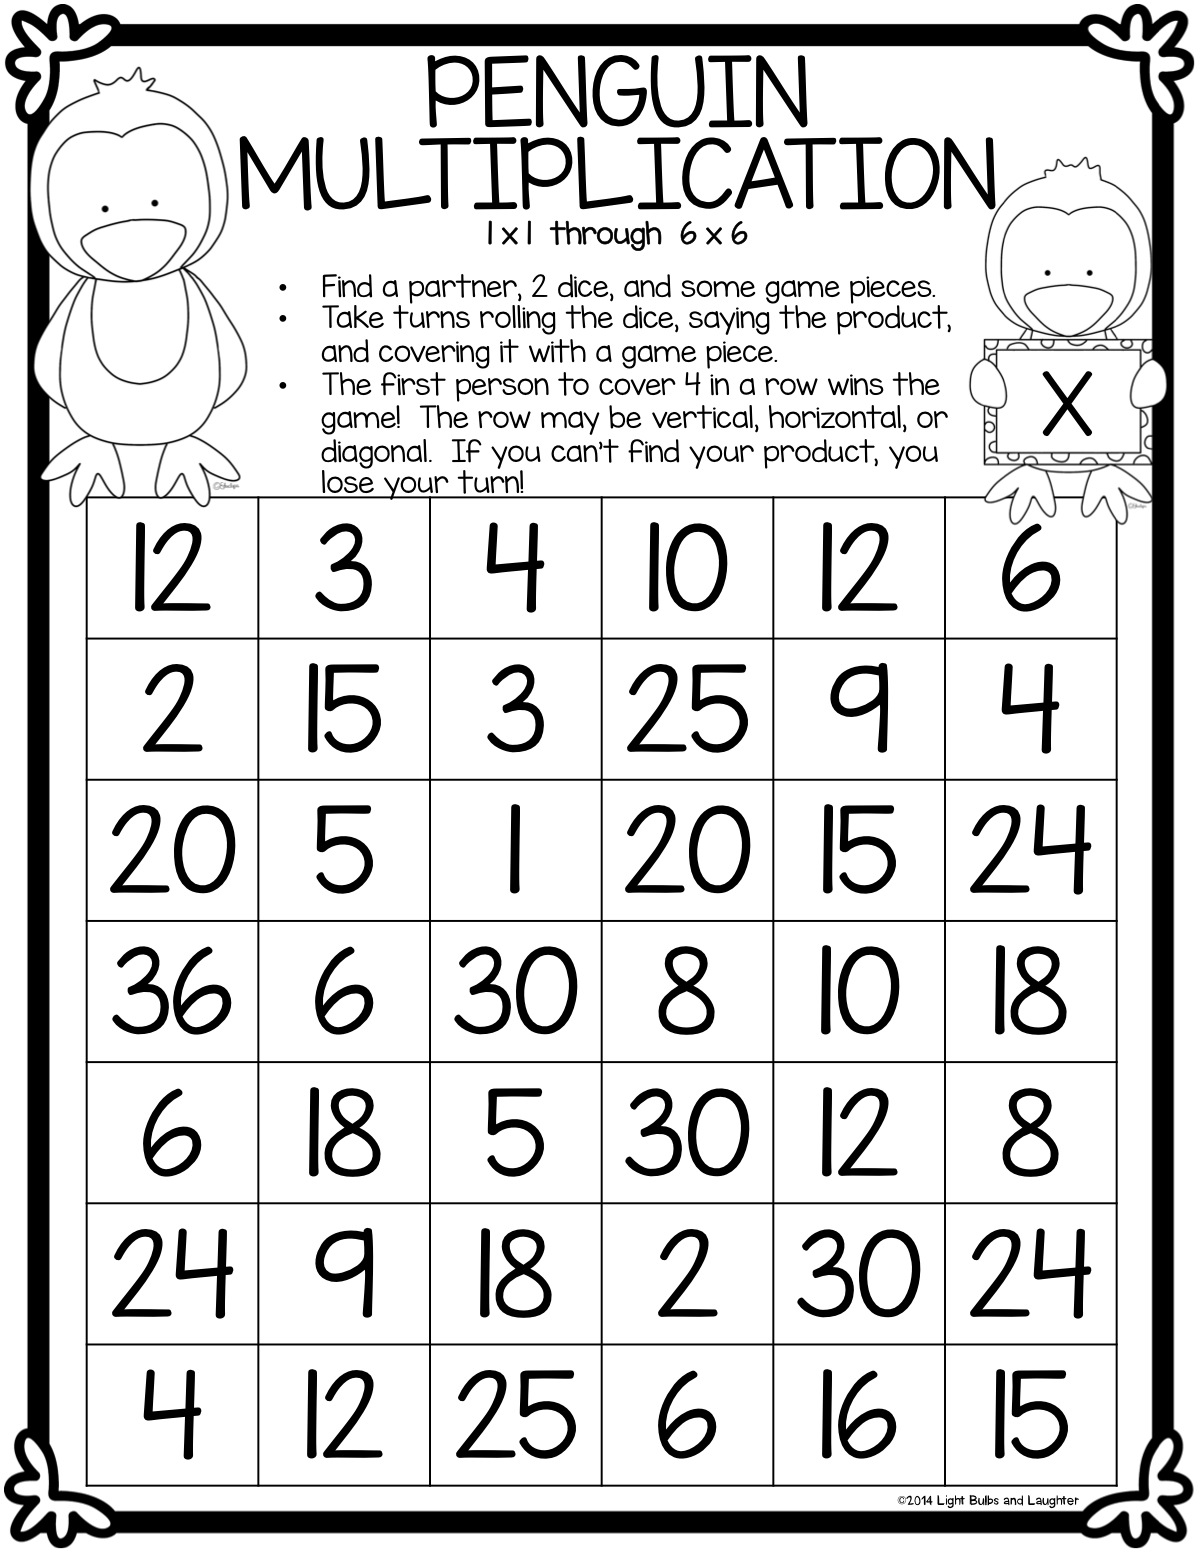 FREE Penguin Multiplication Game from Light Bulbs and Laughter